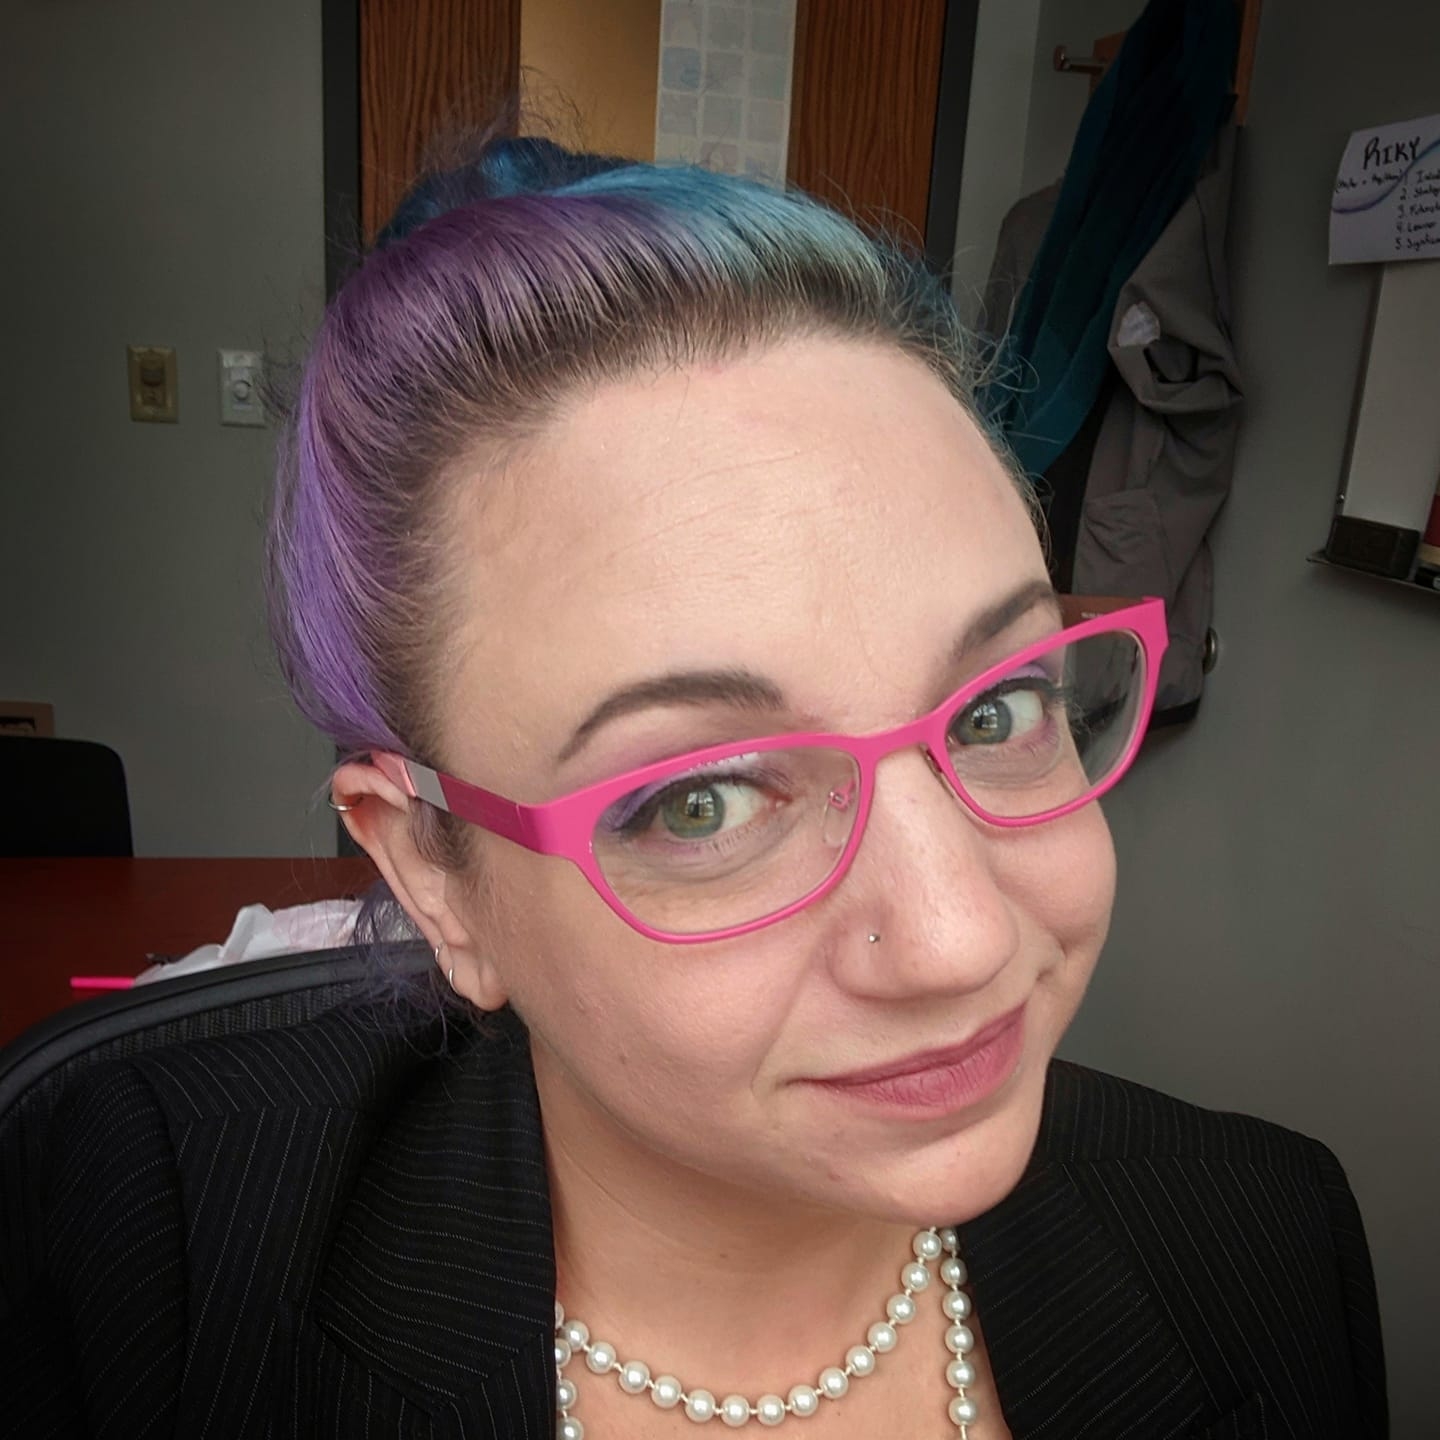 Erika Riky Hanlan with colorful hair and glasses